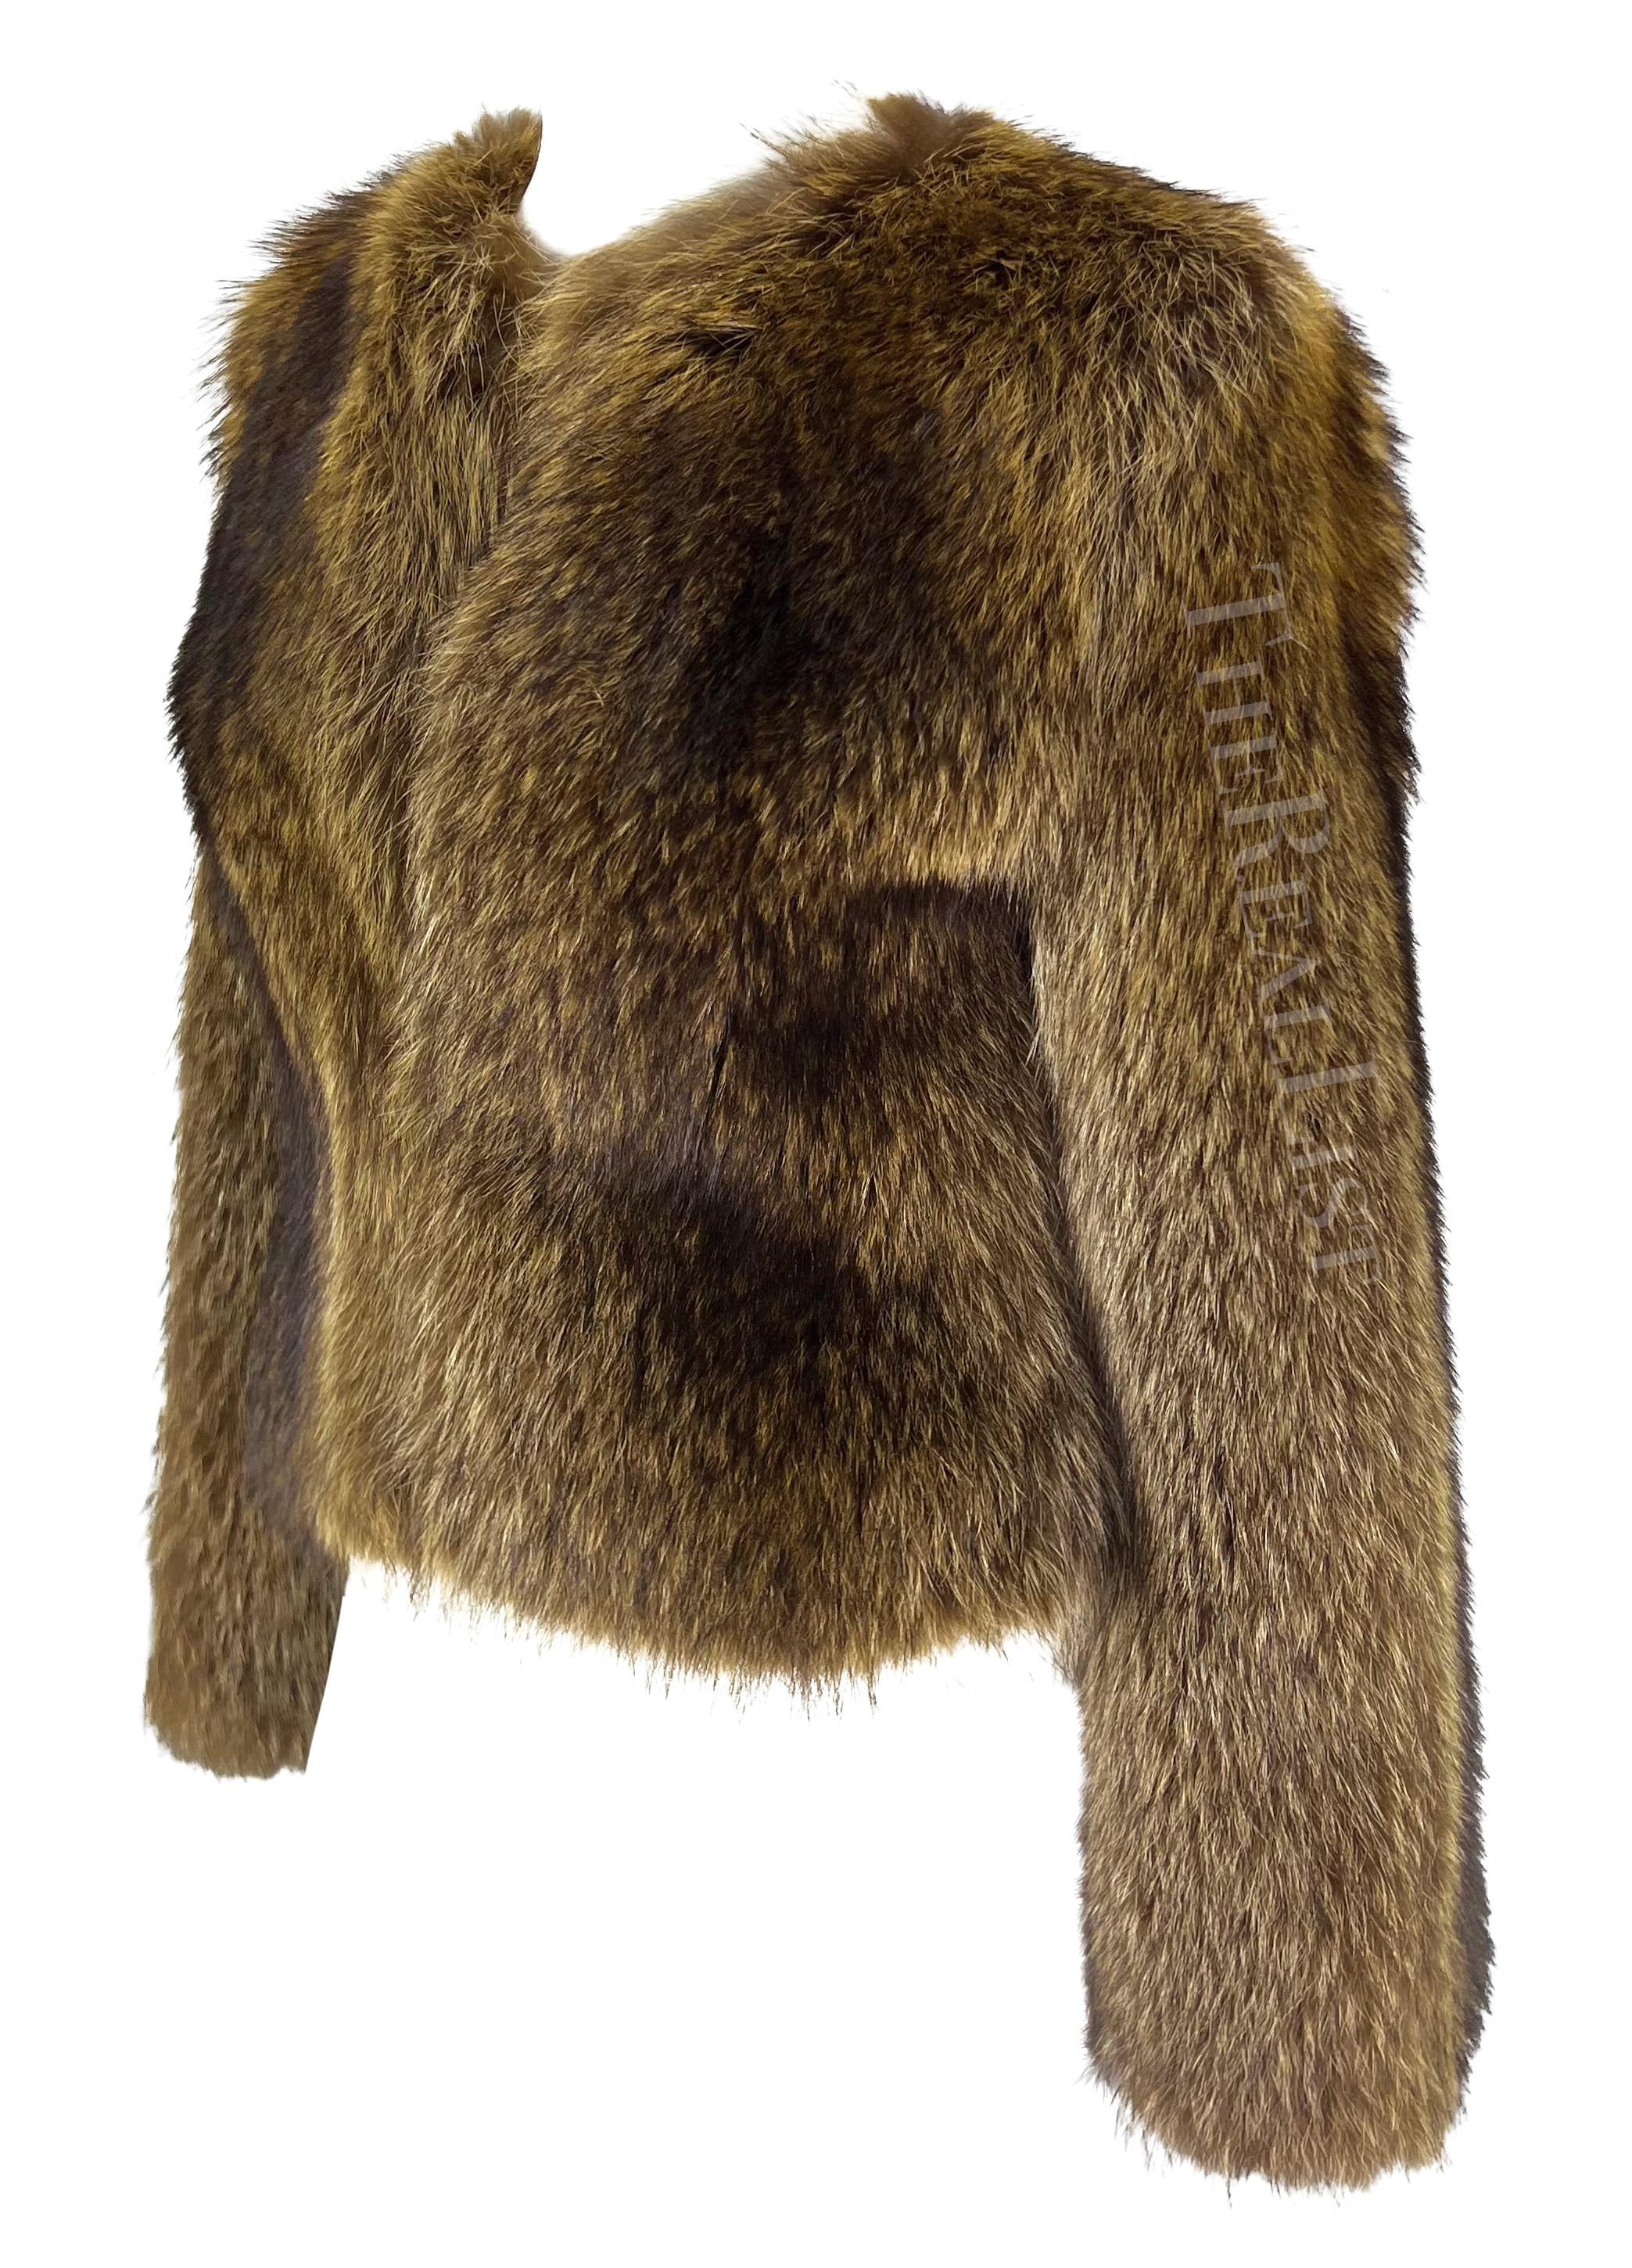 2000s Dolce & Gabbana Raccoon Eel Cropped Brown Fur Coat Jacket In Excellent Condition For Sale In West Hollywood, CA